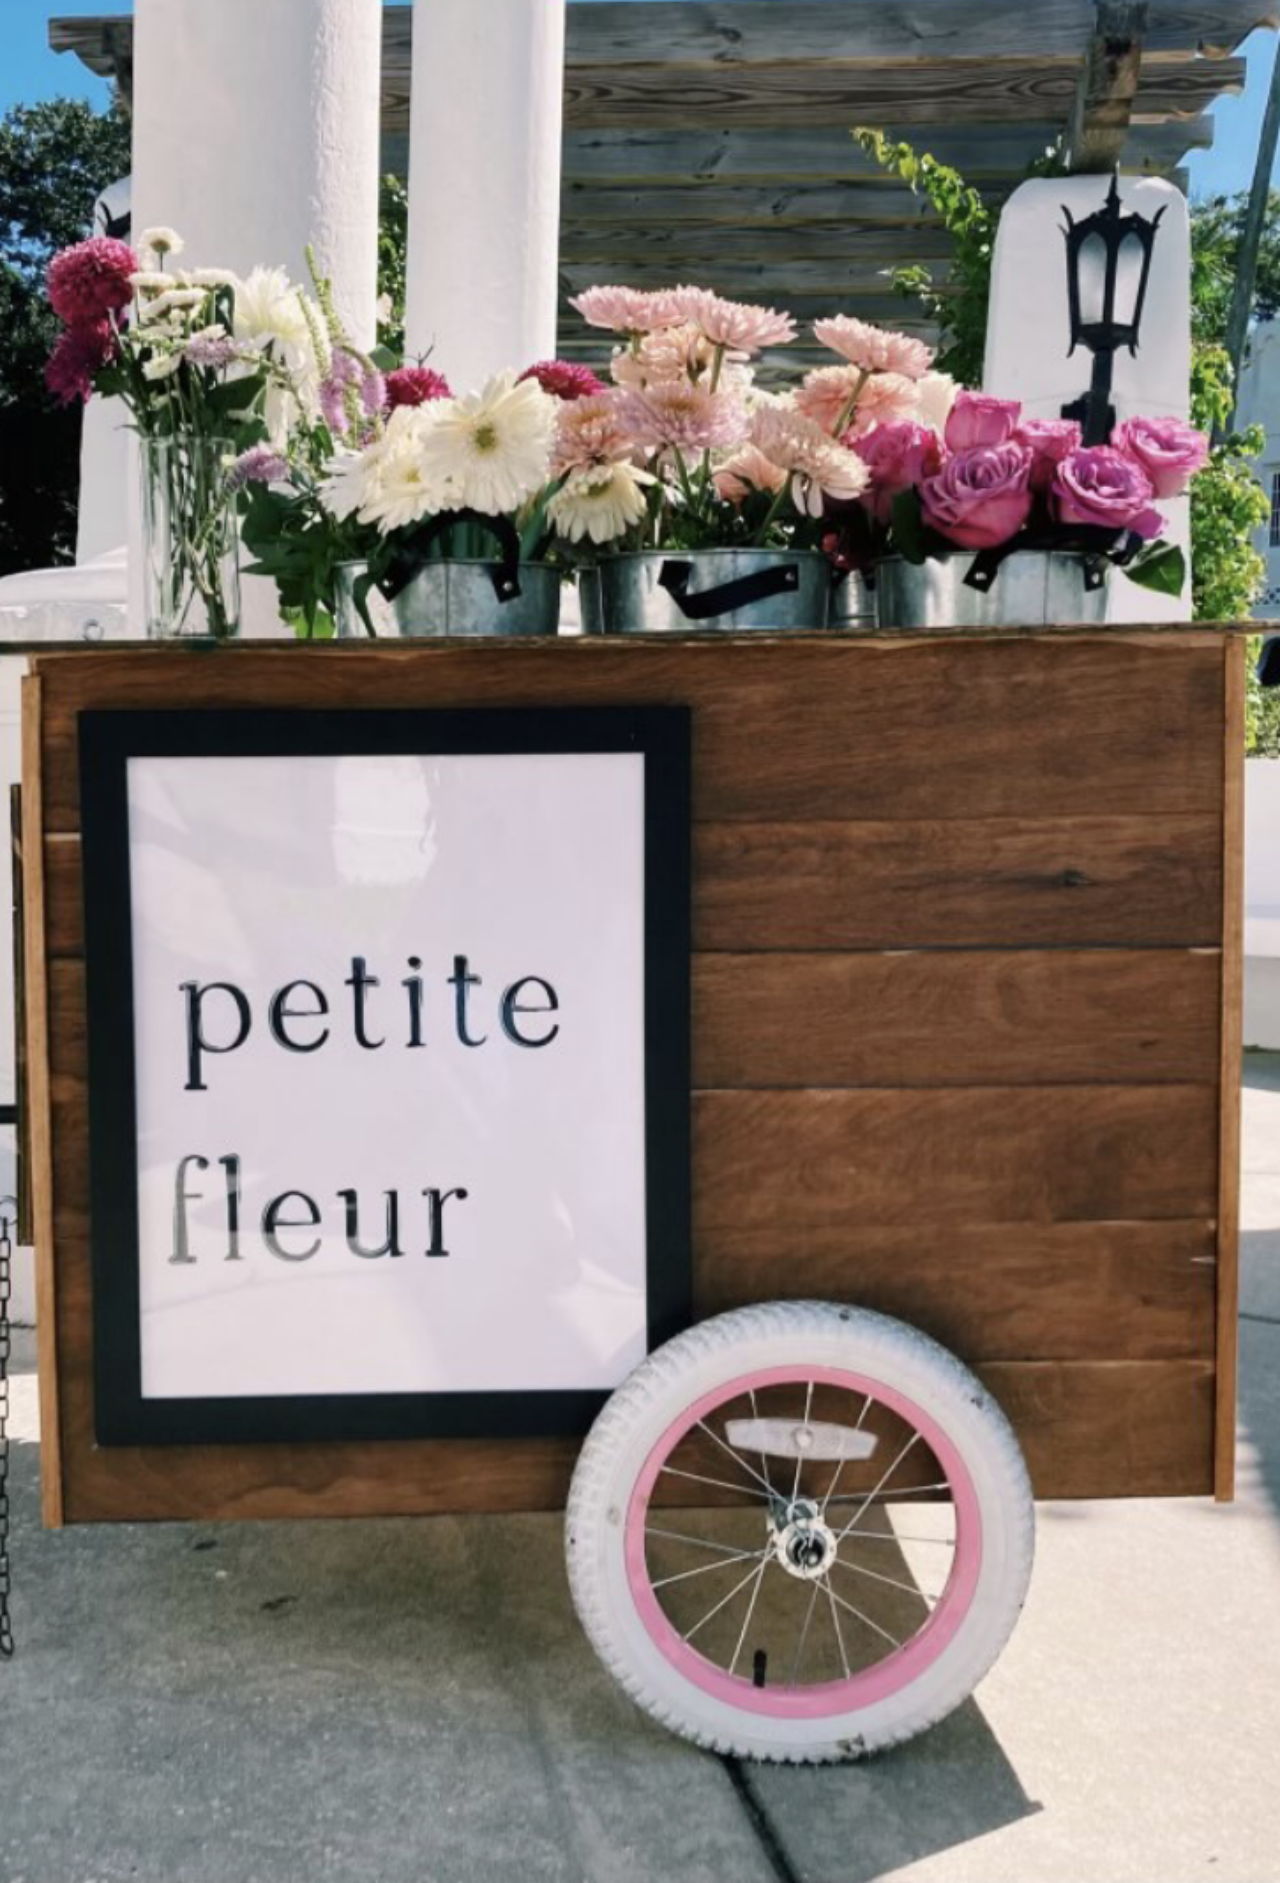 Petite Fleur at the Valentine's Brunch at Flor Fina with pink roses an flowers in a wooden cart